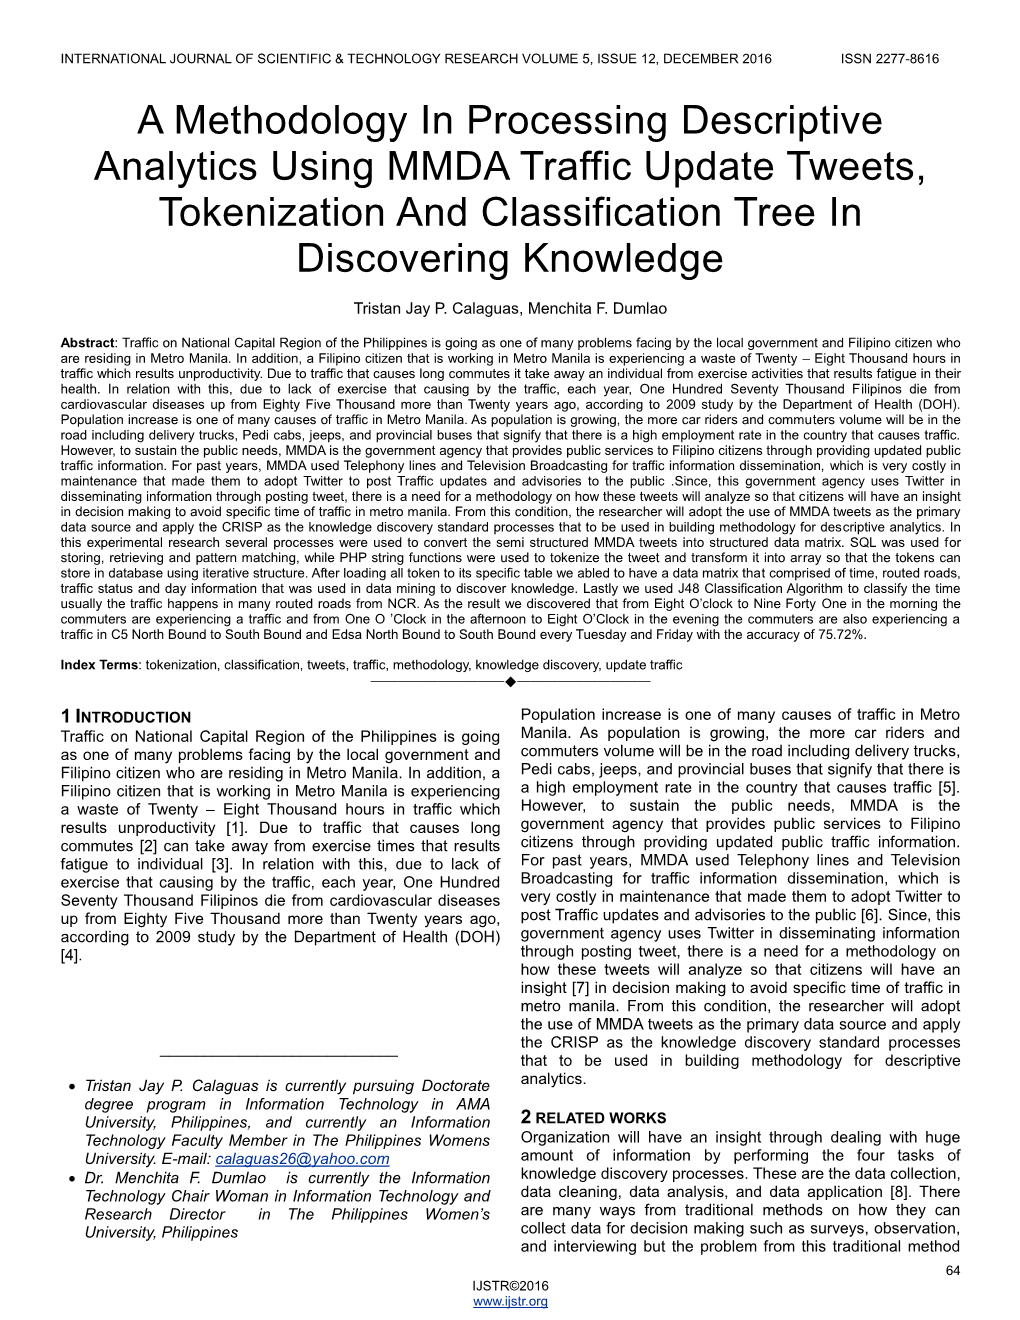 A Methodology in Processing Descriptive Analytics Using MMDA Traffic Update Tweets, Tokenization and Classification Tree in Discovering Knowledge